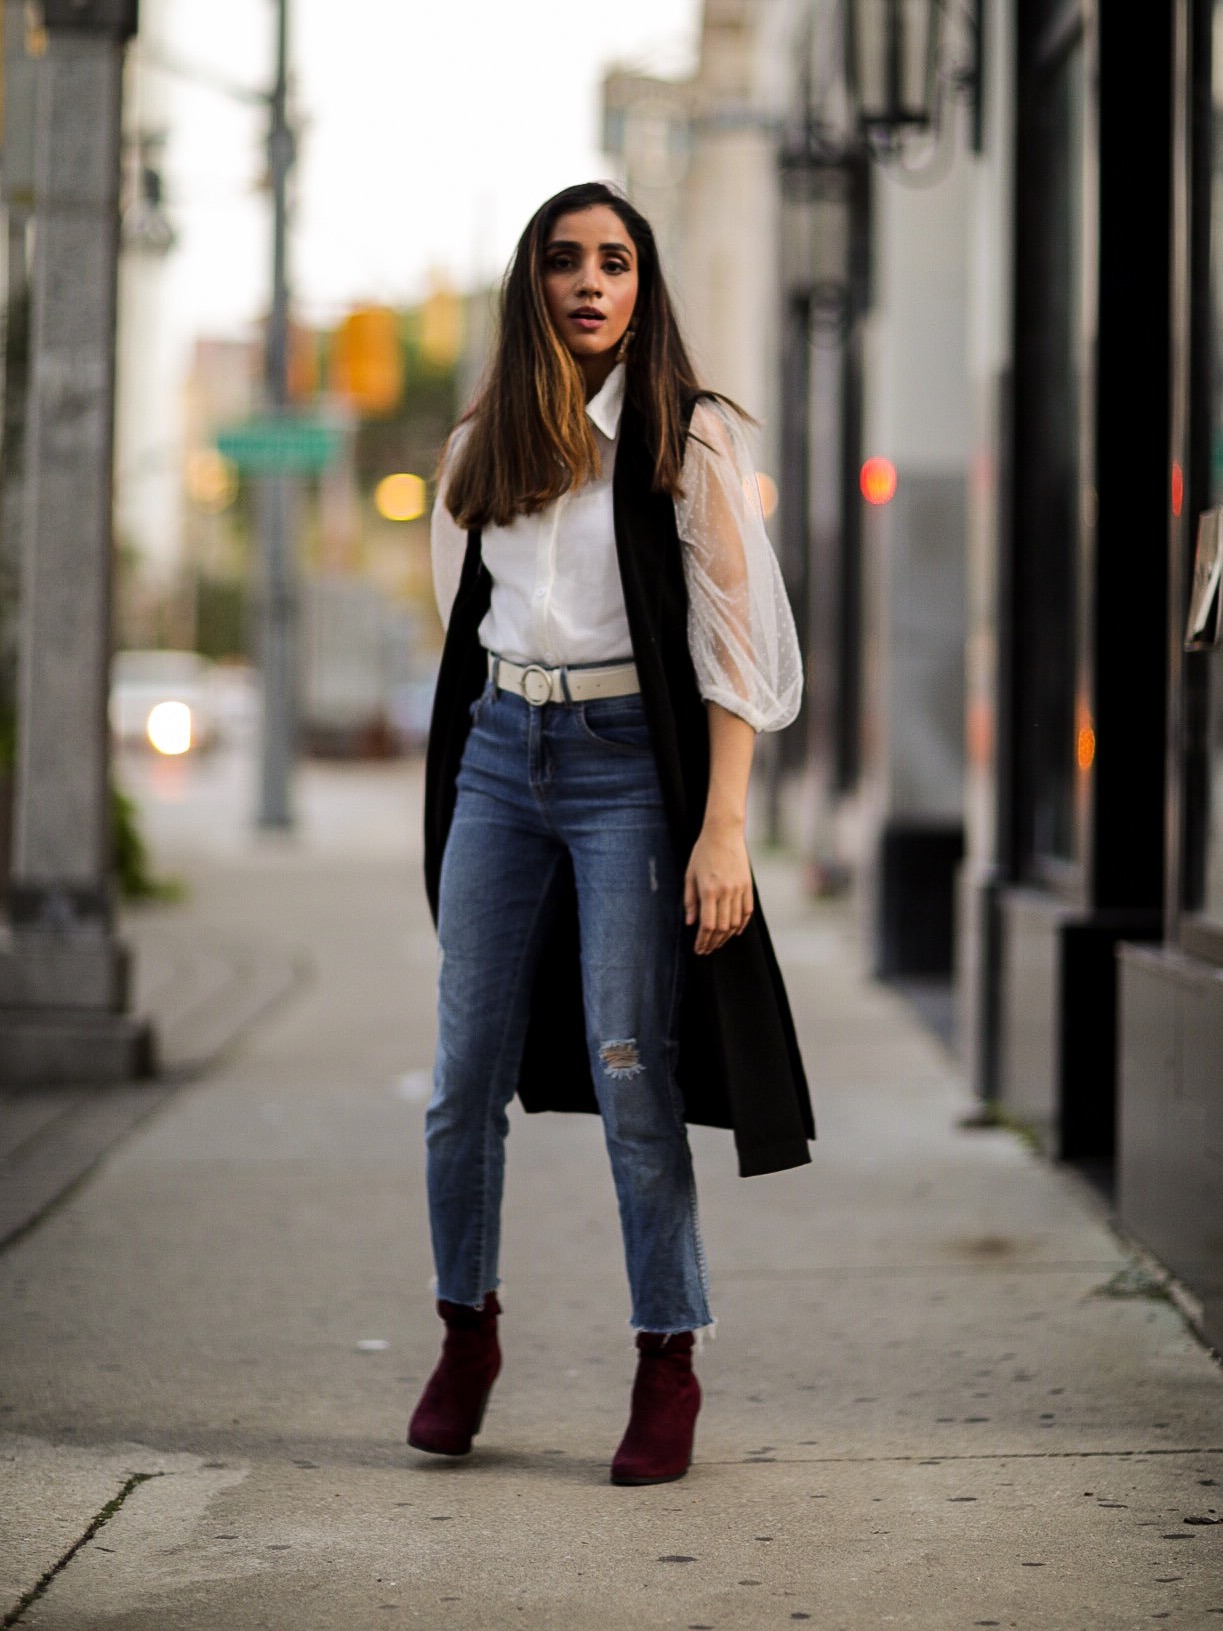 Transitional Shoes To Have For Fall Faiza Inam SincerelyHumble Blog Fall 2019 New York Trending Fast Fashion Forward Comfort Boots Booties 2